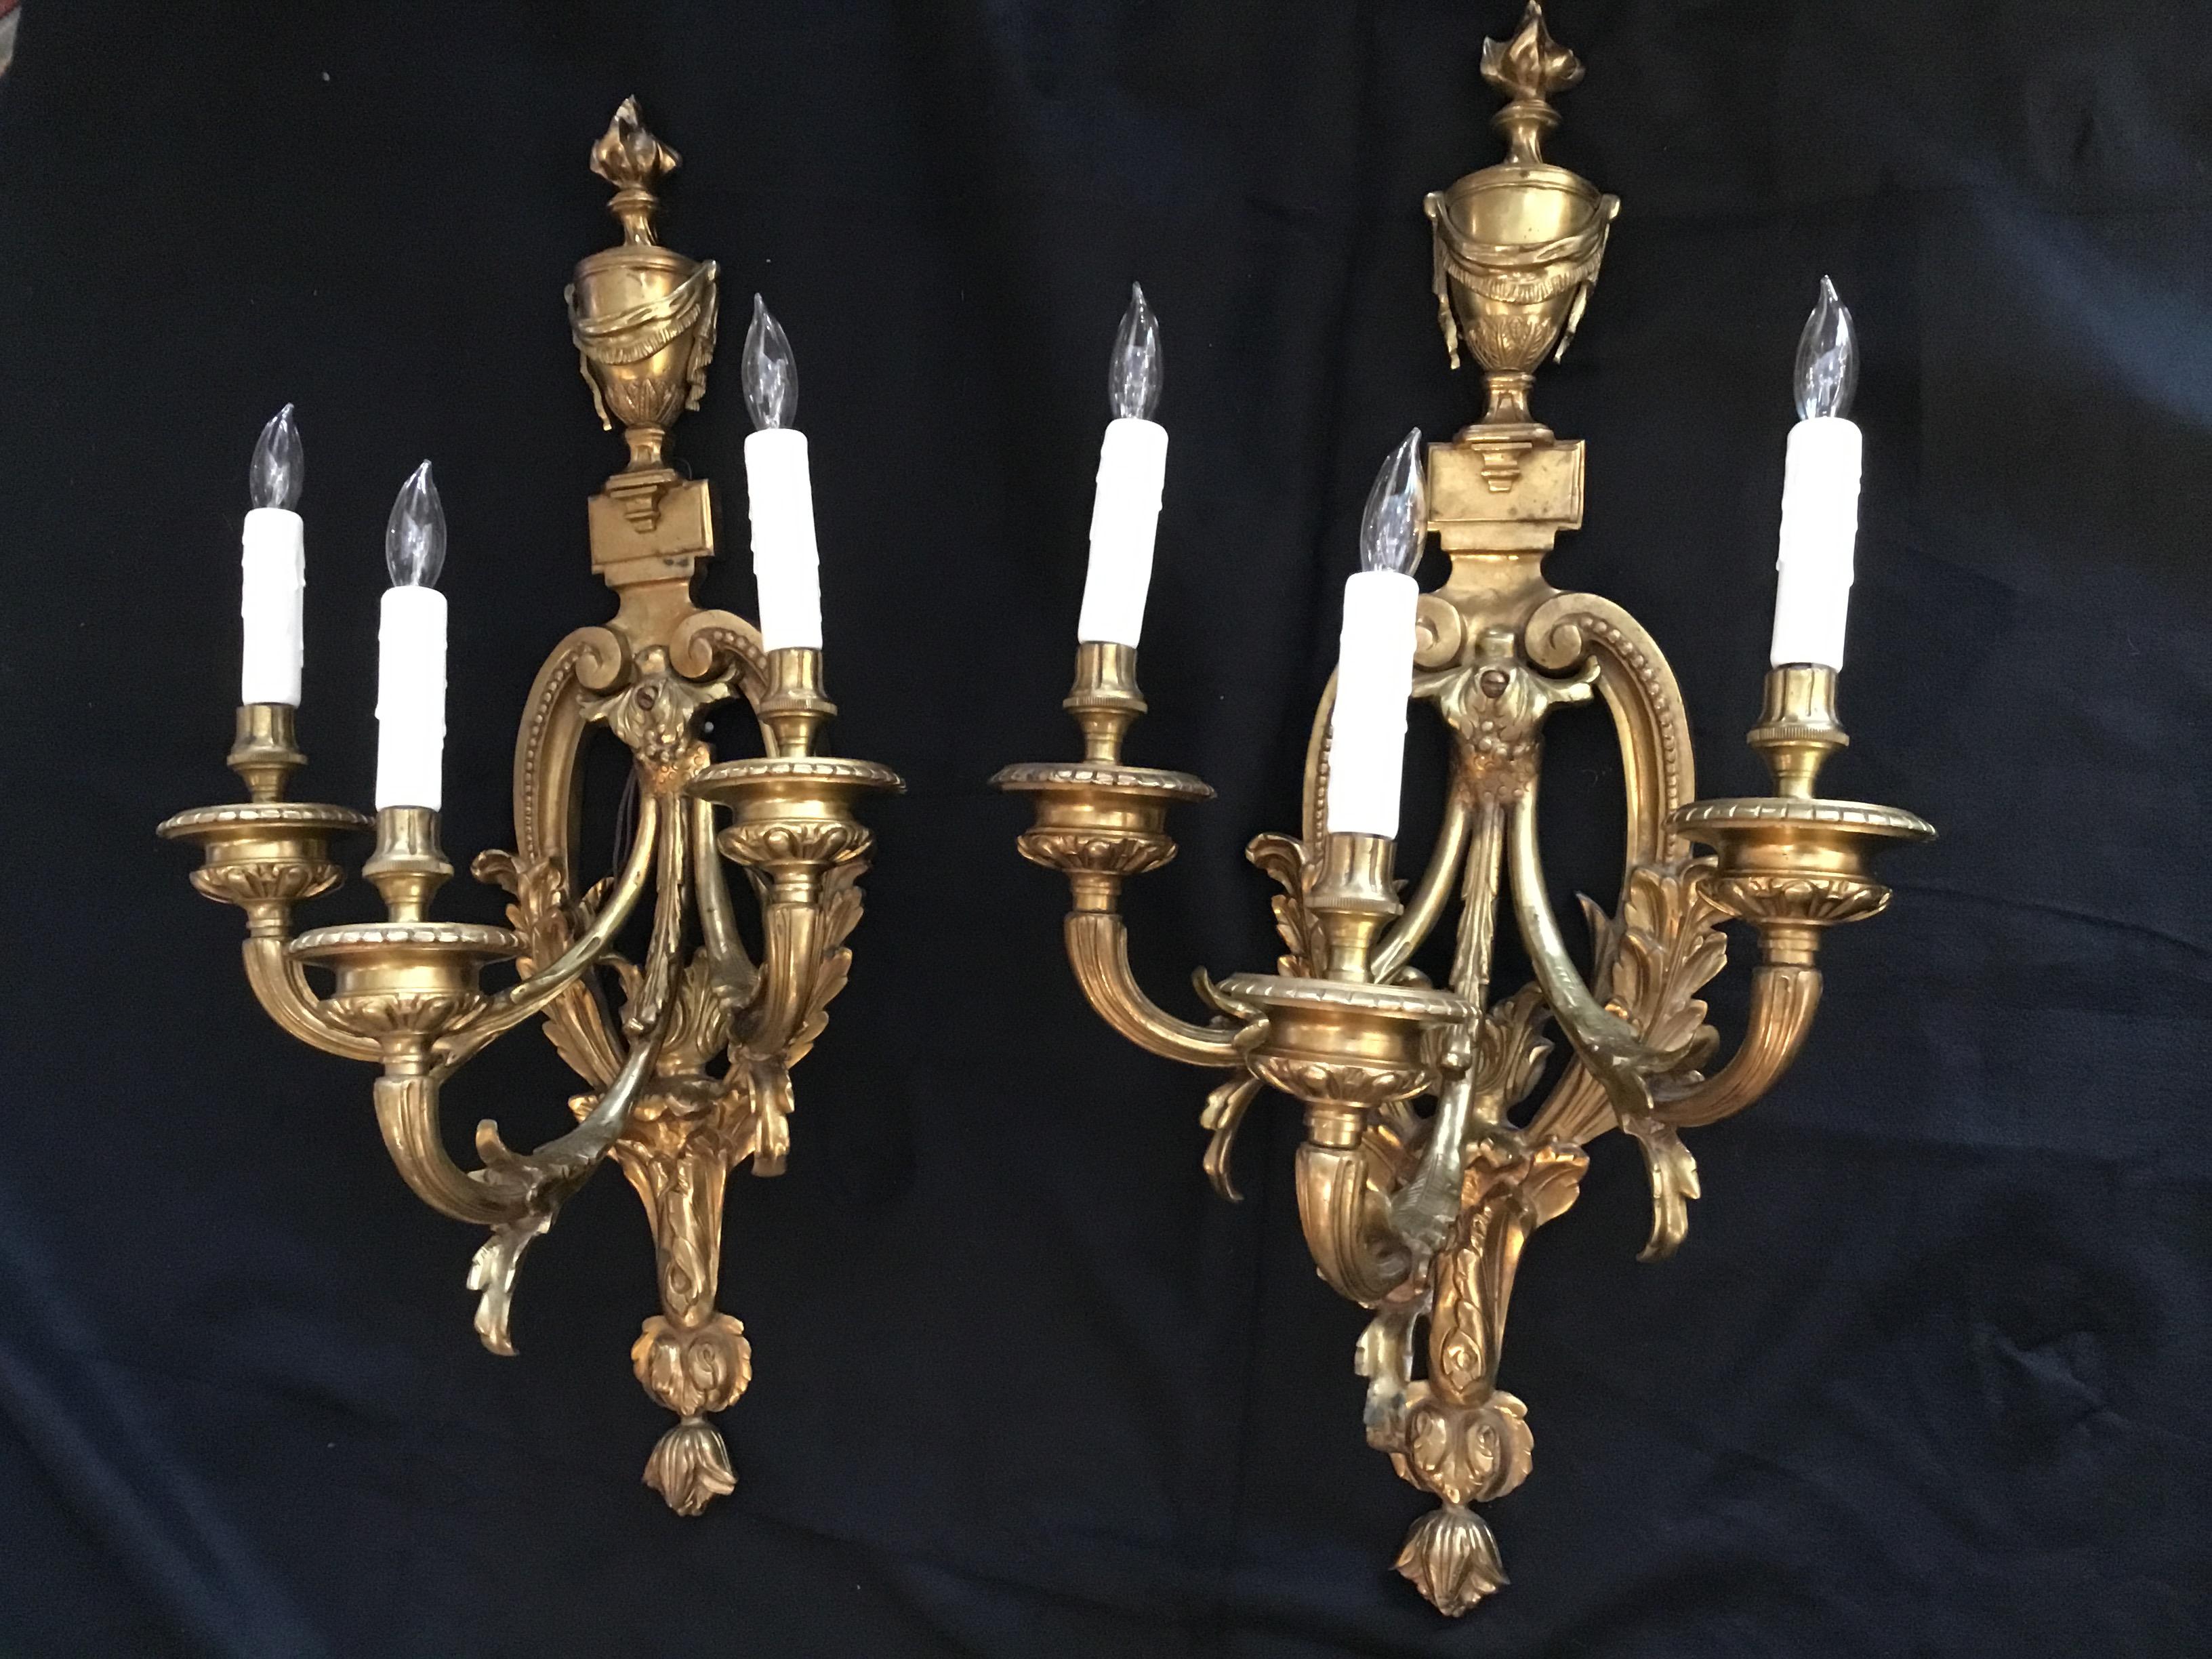 English Pair of Gilt Bronze Sconces in the Adam’s Style, circa 1900